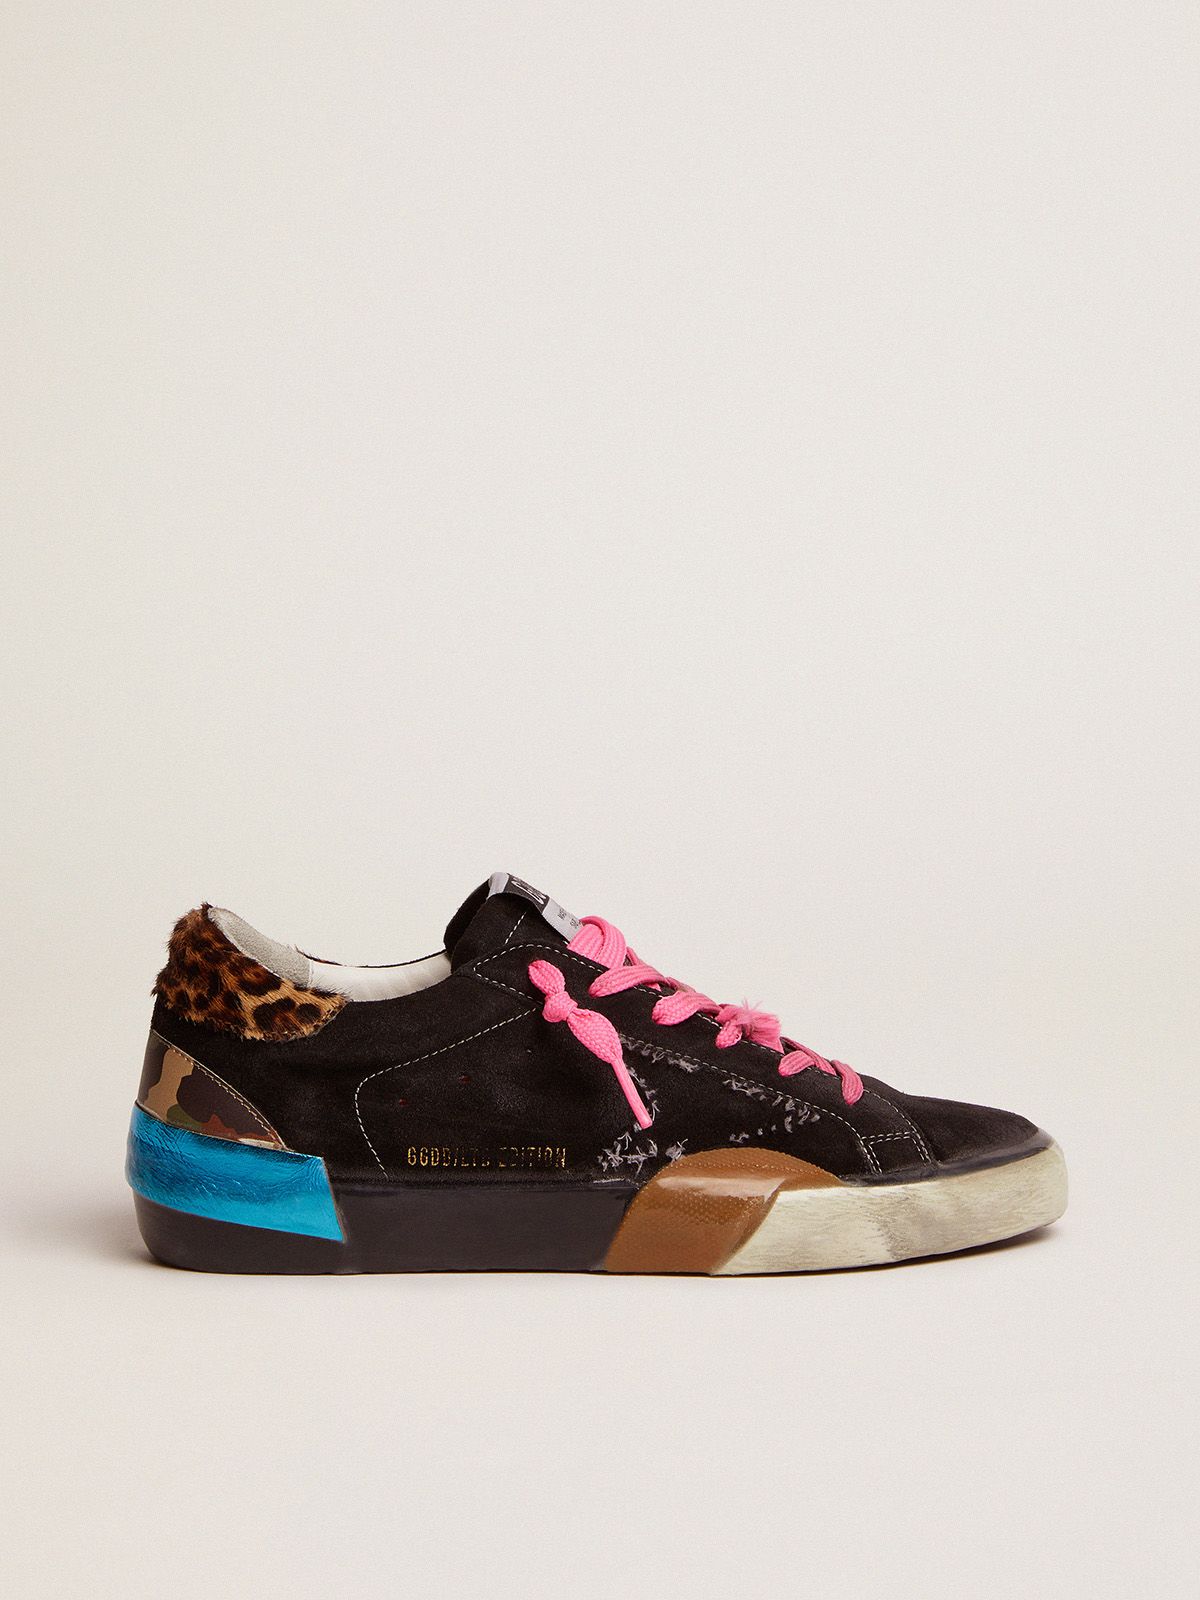 golden goose leopard-print multi-foxing suede pony black sneakers Super-Star skin with heel in LAB tab and